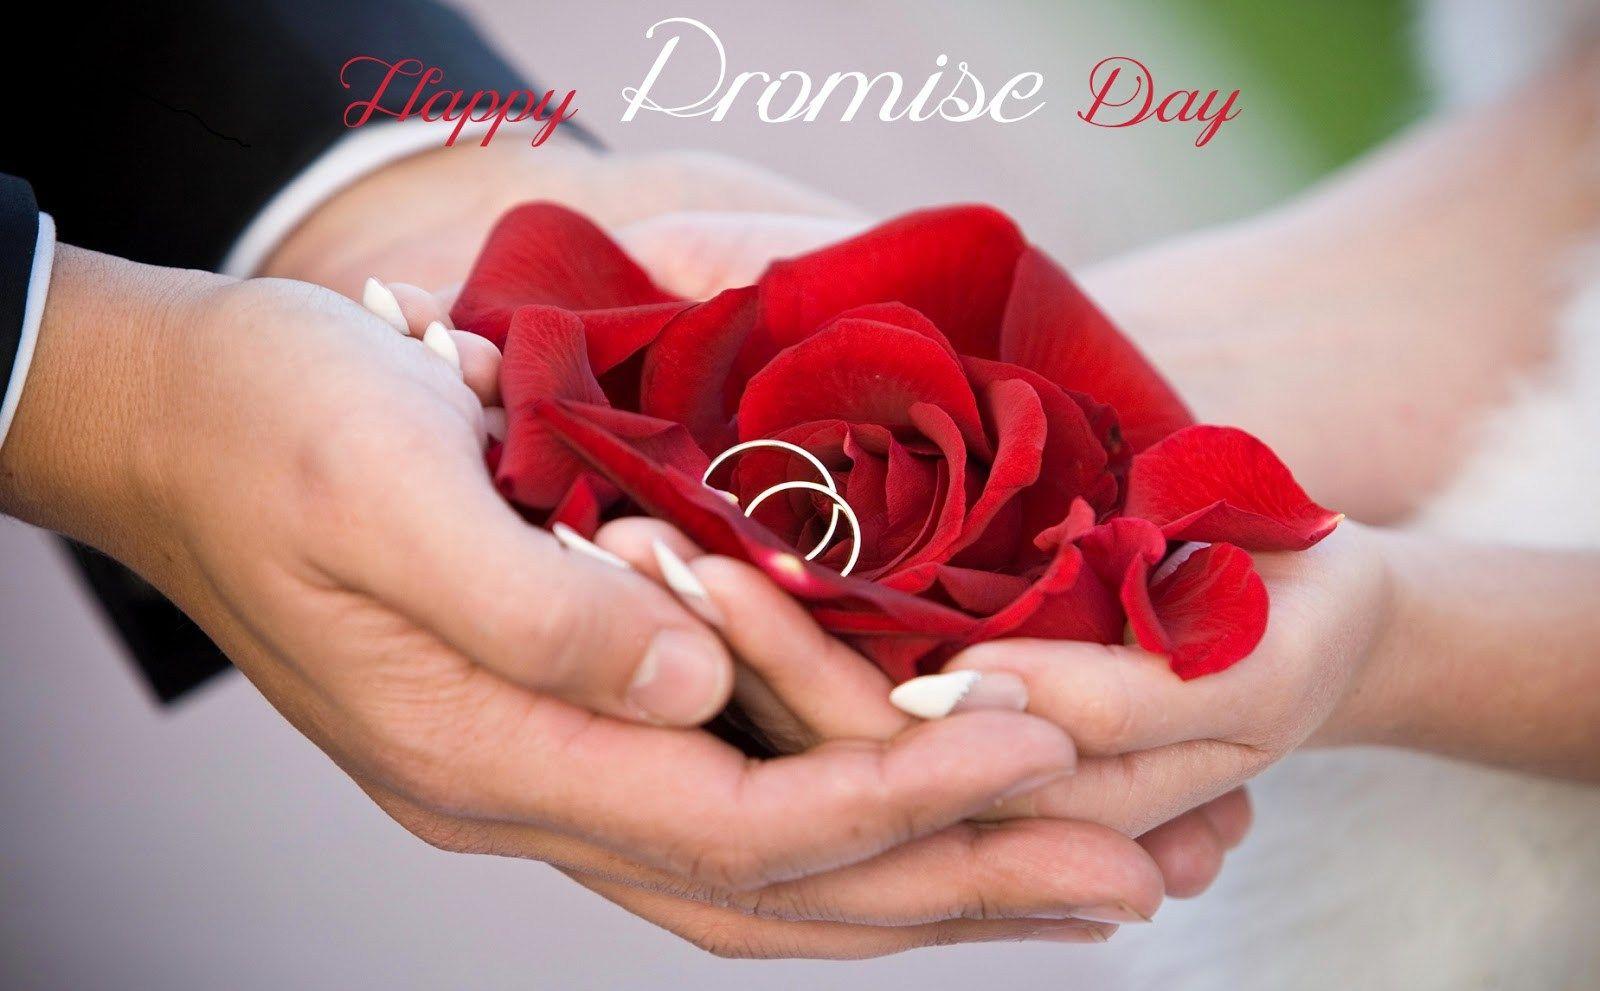 happy promise day wallpaper and HD image. Happy promise day